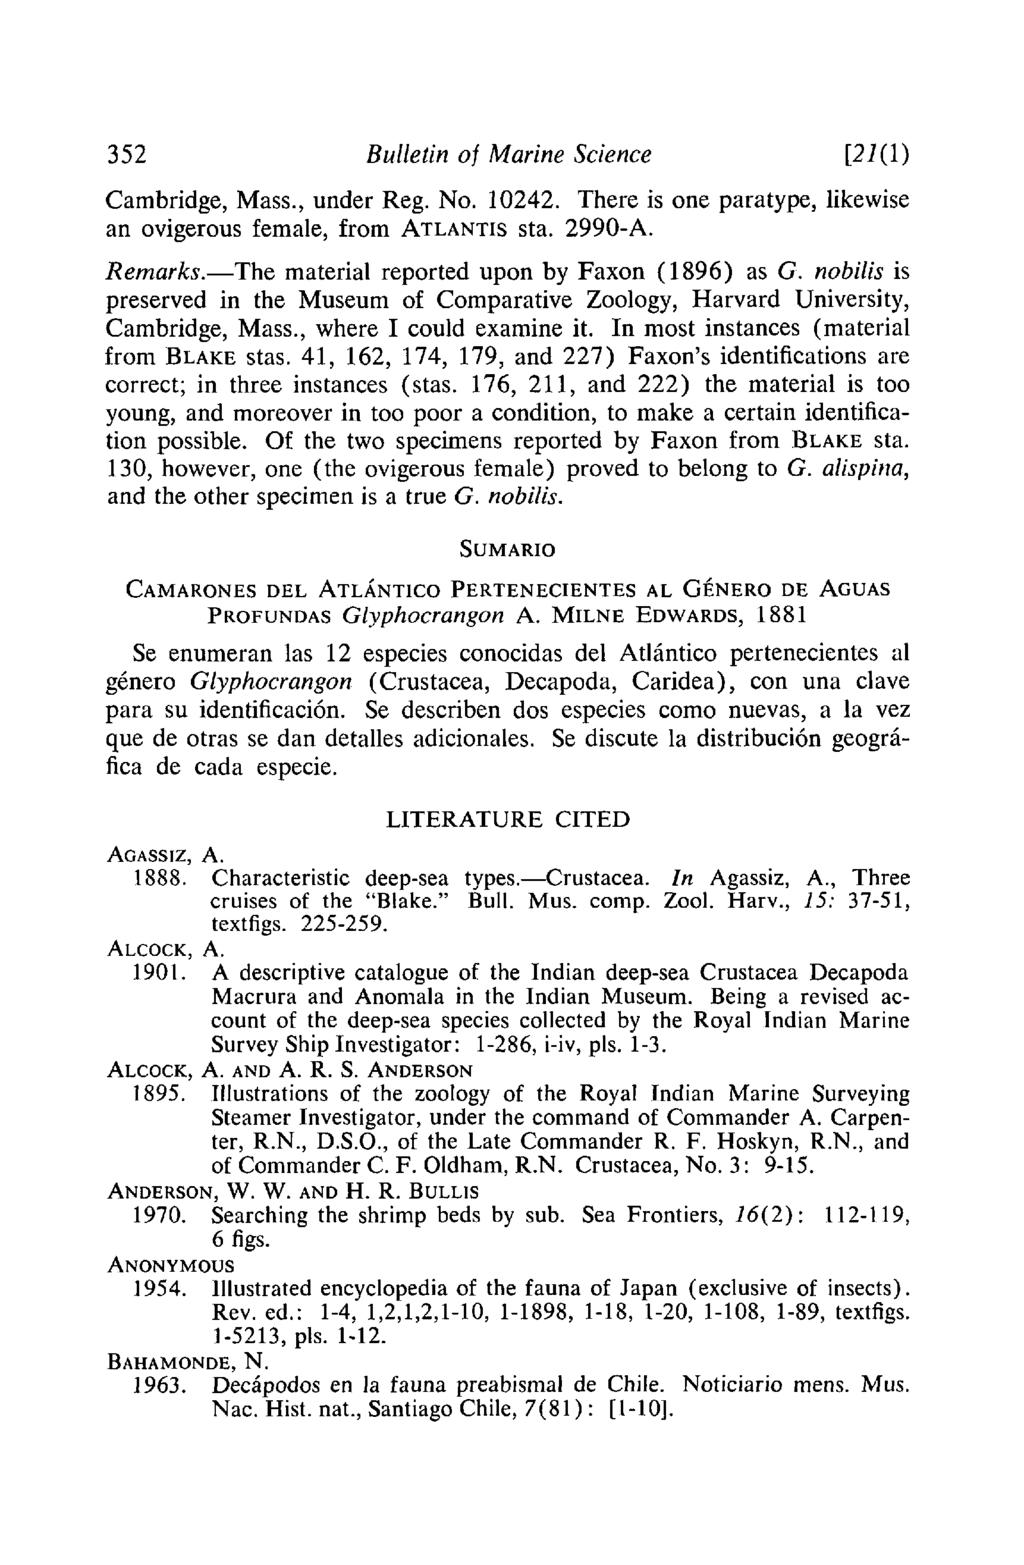 352 Bulletin of Marine Science [21(1) Cambridge, Mass., under Reg. No. 10242. There is one paratype, likewise an ovigerous female, from ATLANTIS sta. 2990-A. Remarks.